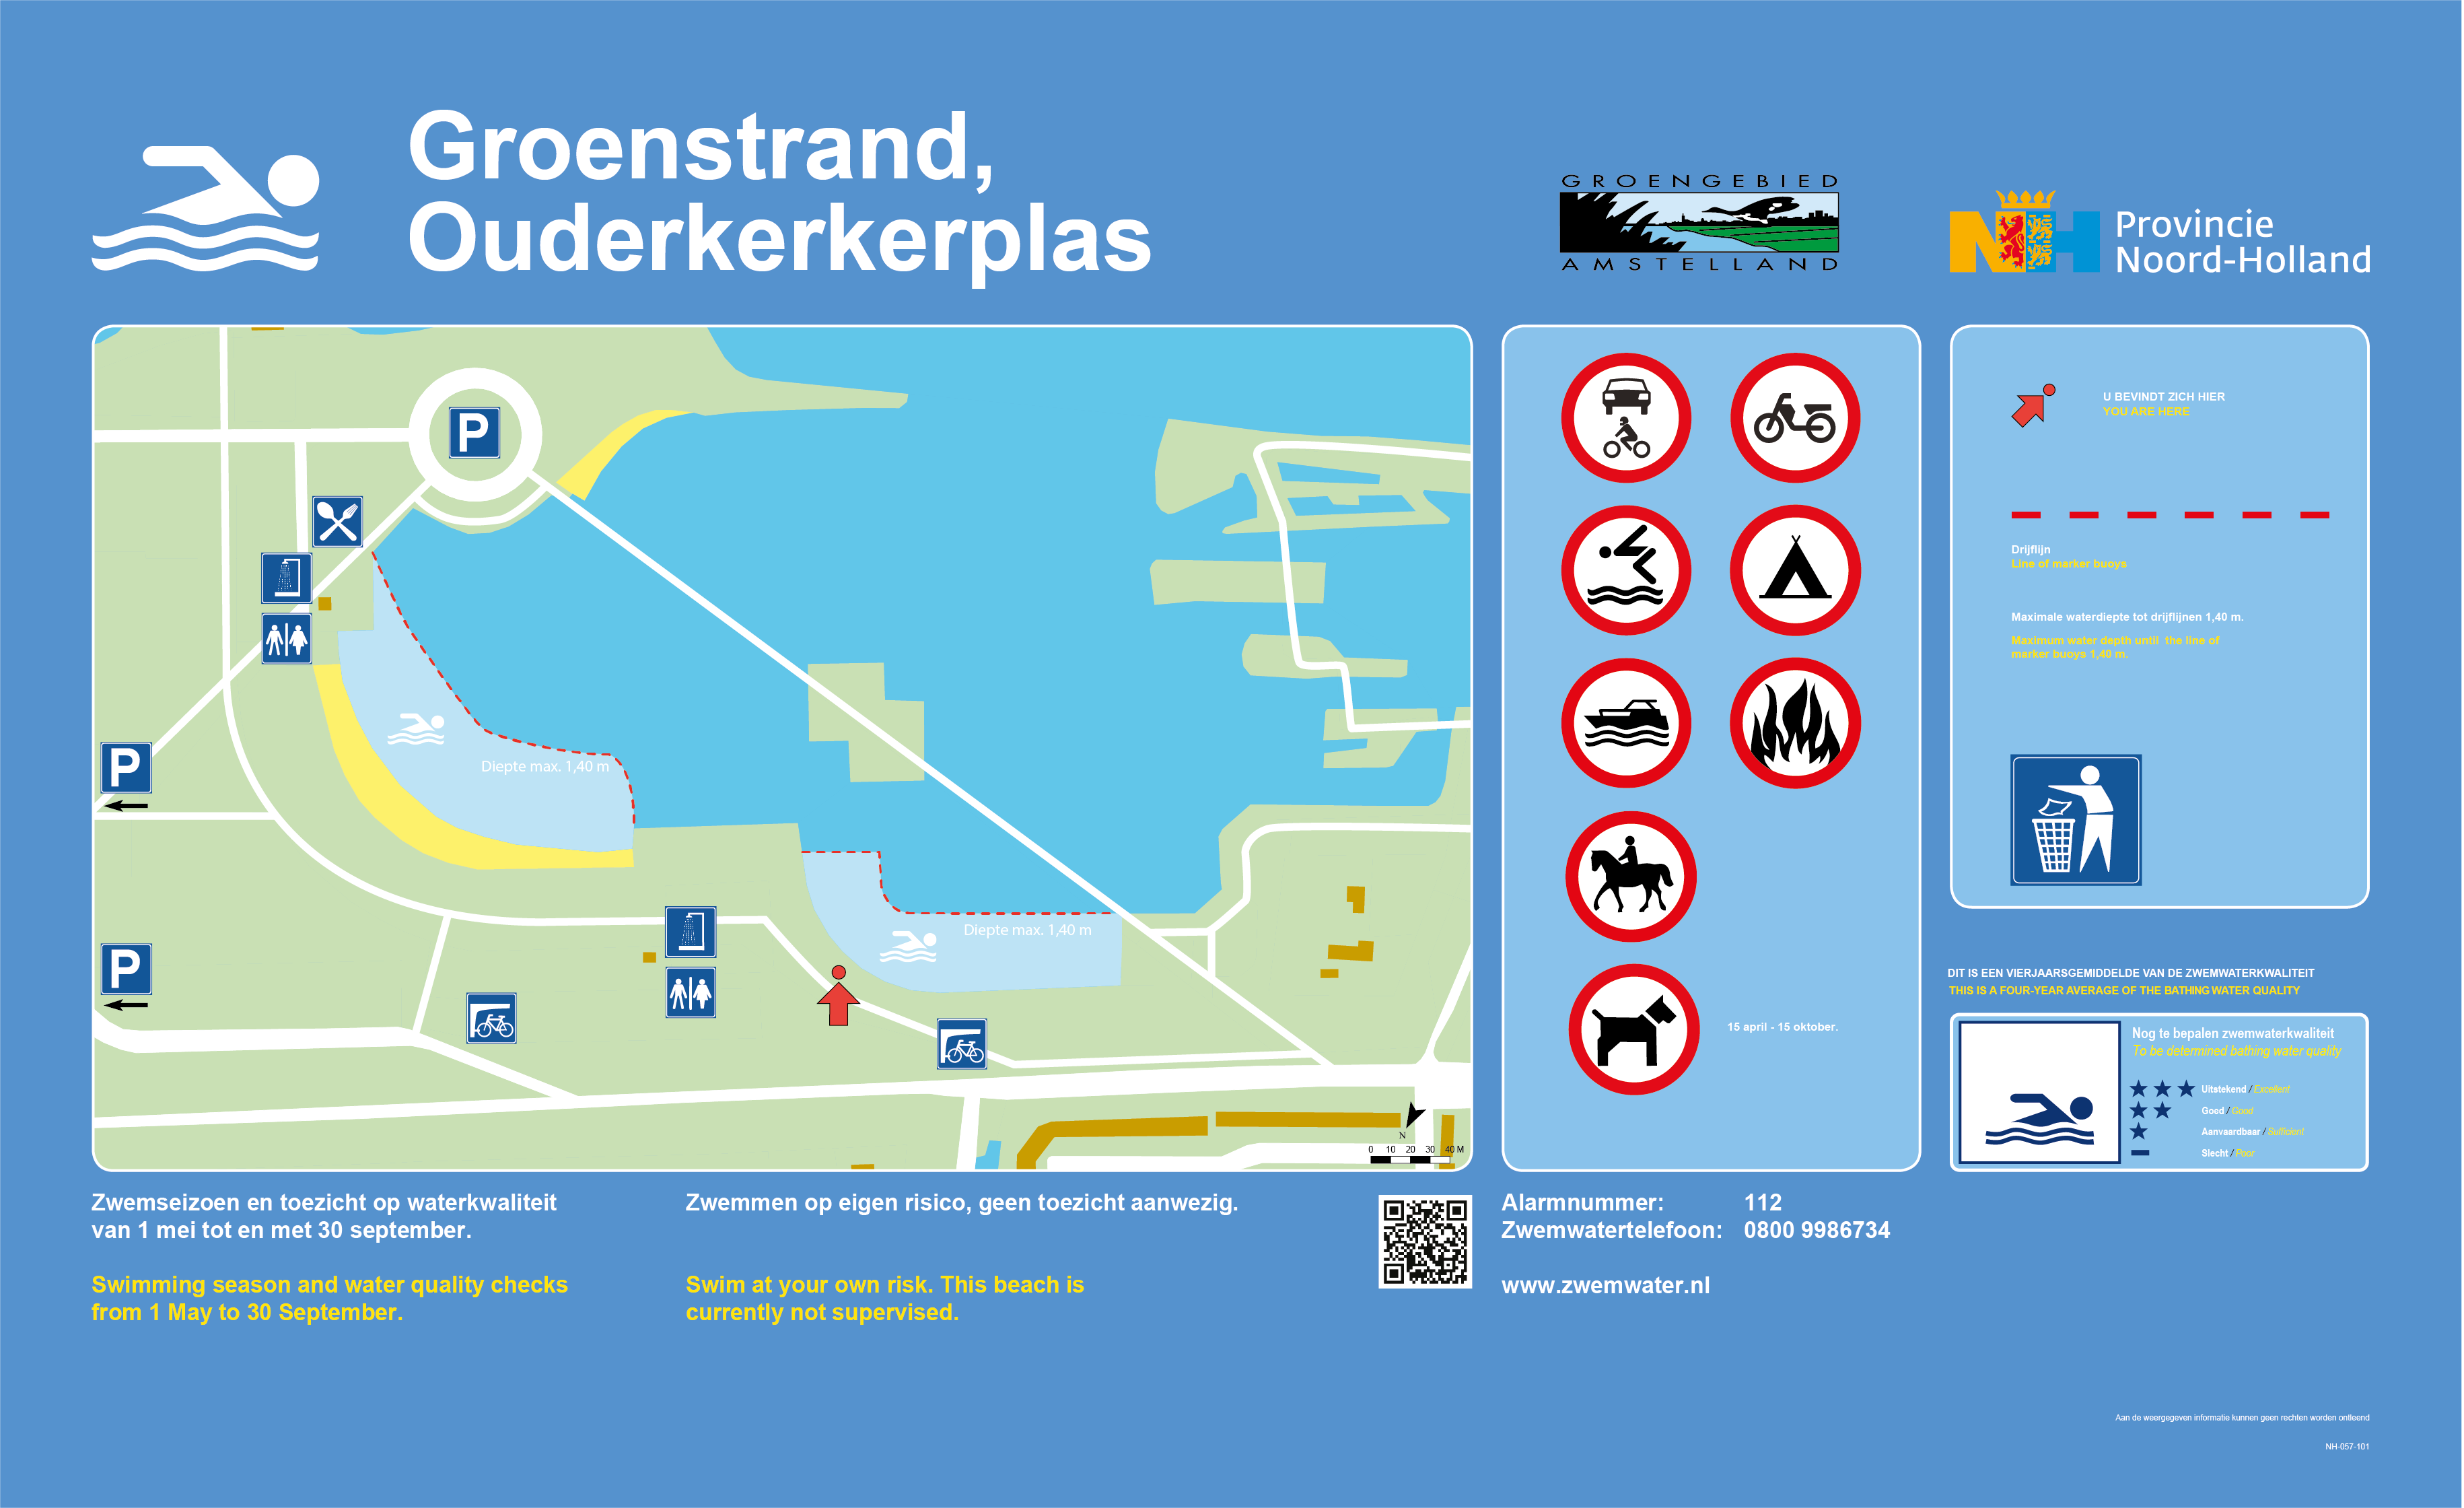 The information board at the swimming location Groenstrand, Ouderkerkerplas